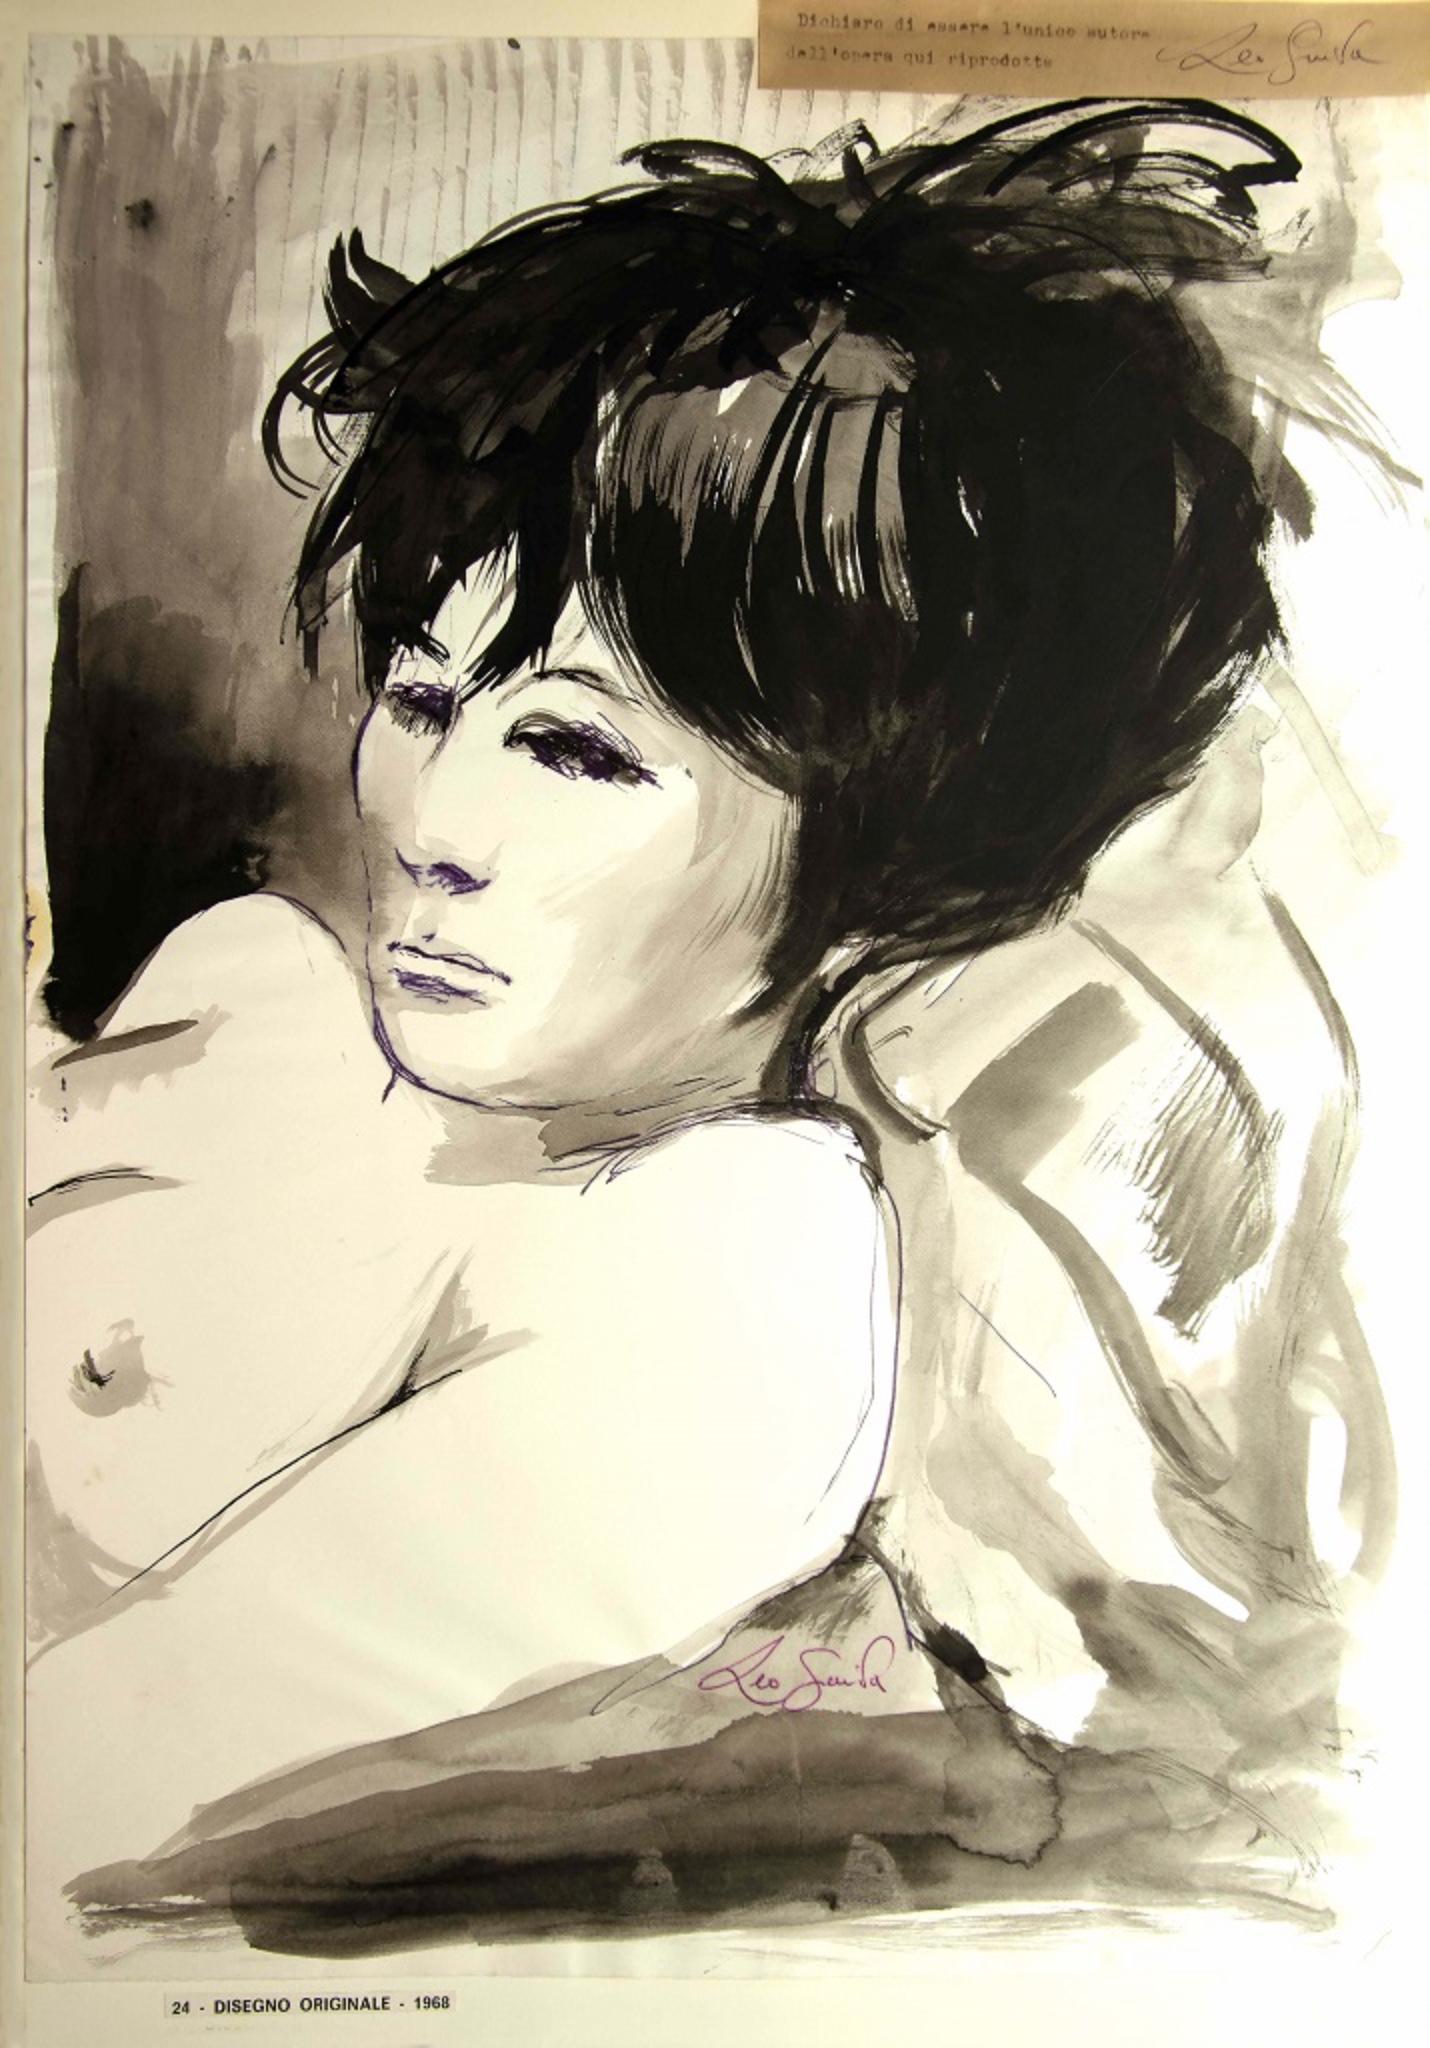 Portrait of Woman - Original China Ink and Watercolor by Leo Guida - 1968